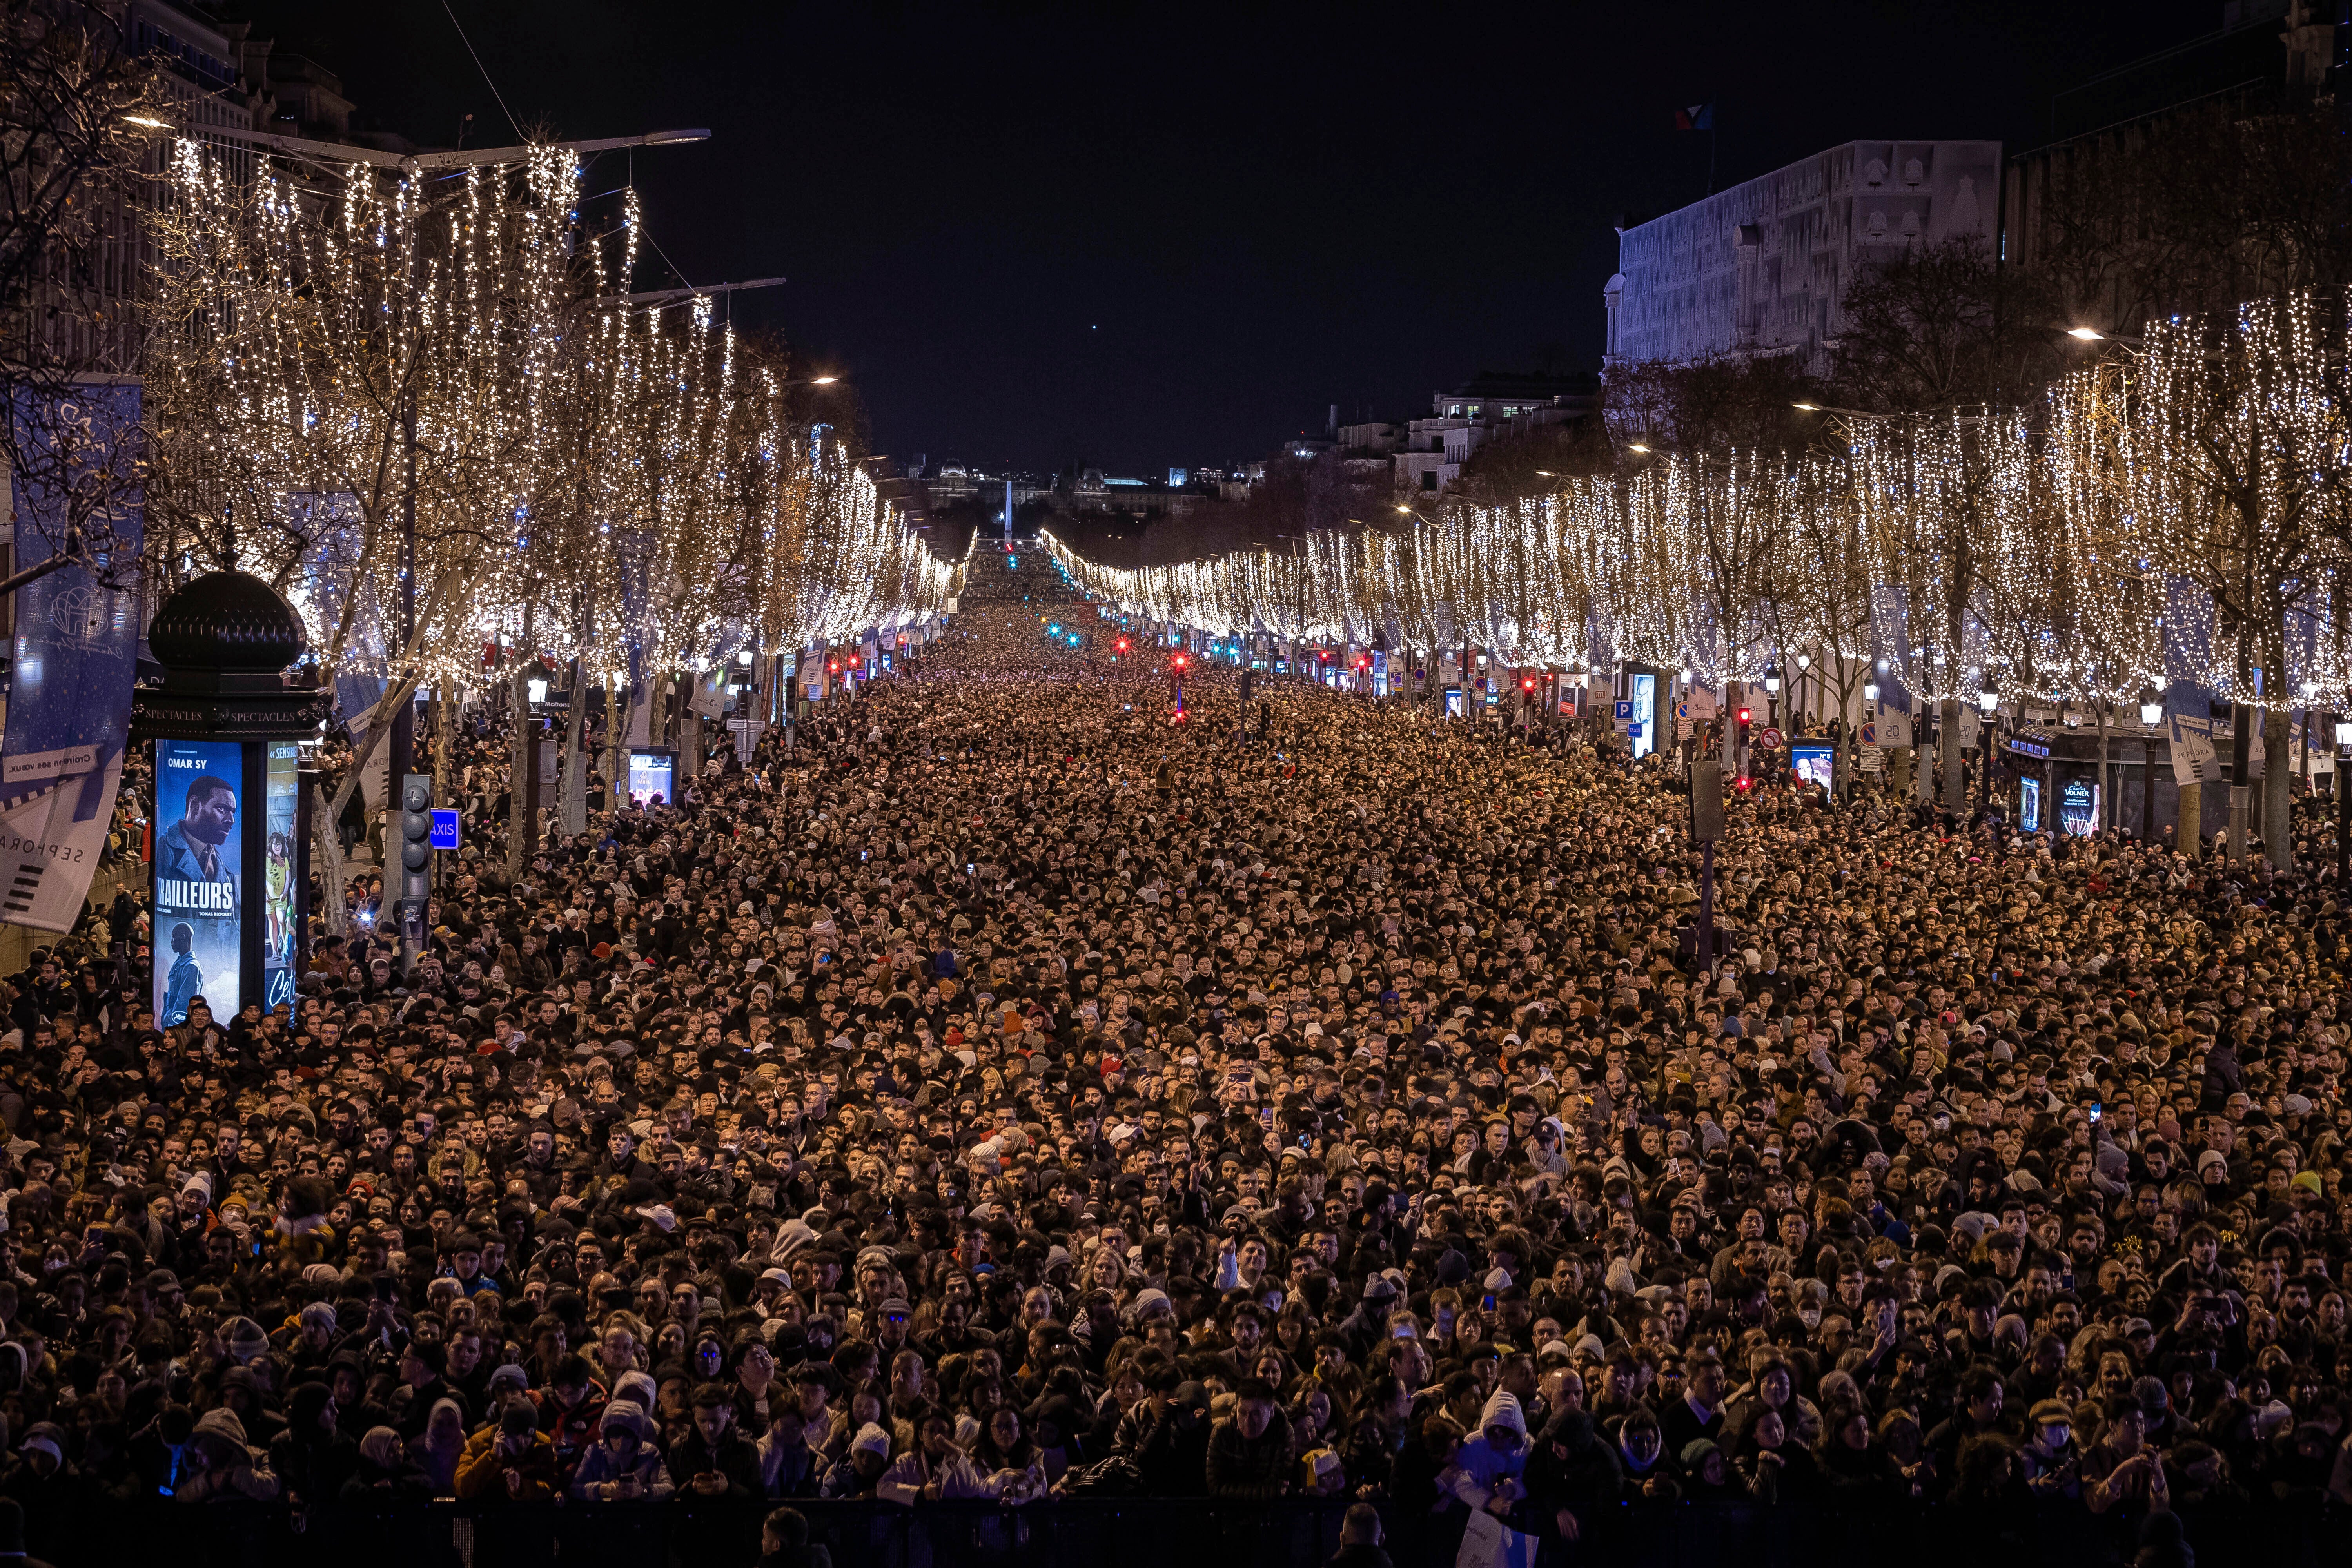 Revellers watch a sound and light show projected on the Arc de Triomphe as they celebrate the New Year on the Champs Elysees in Paris